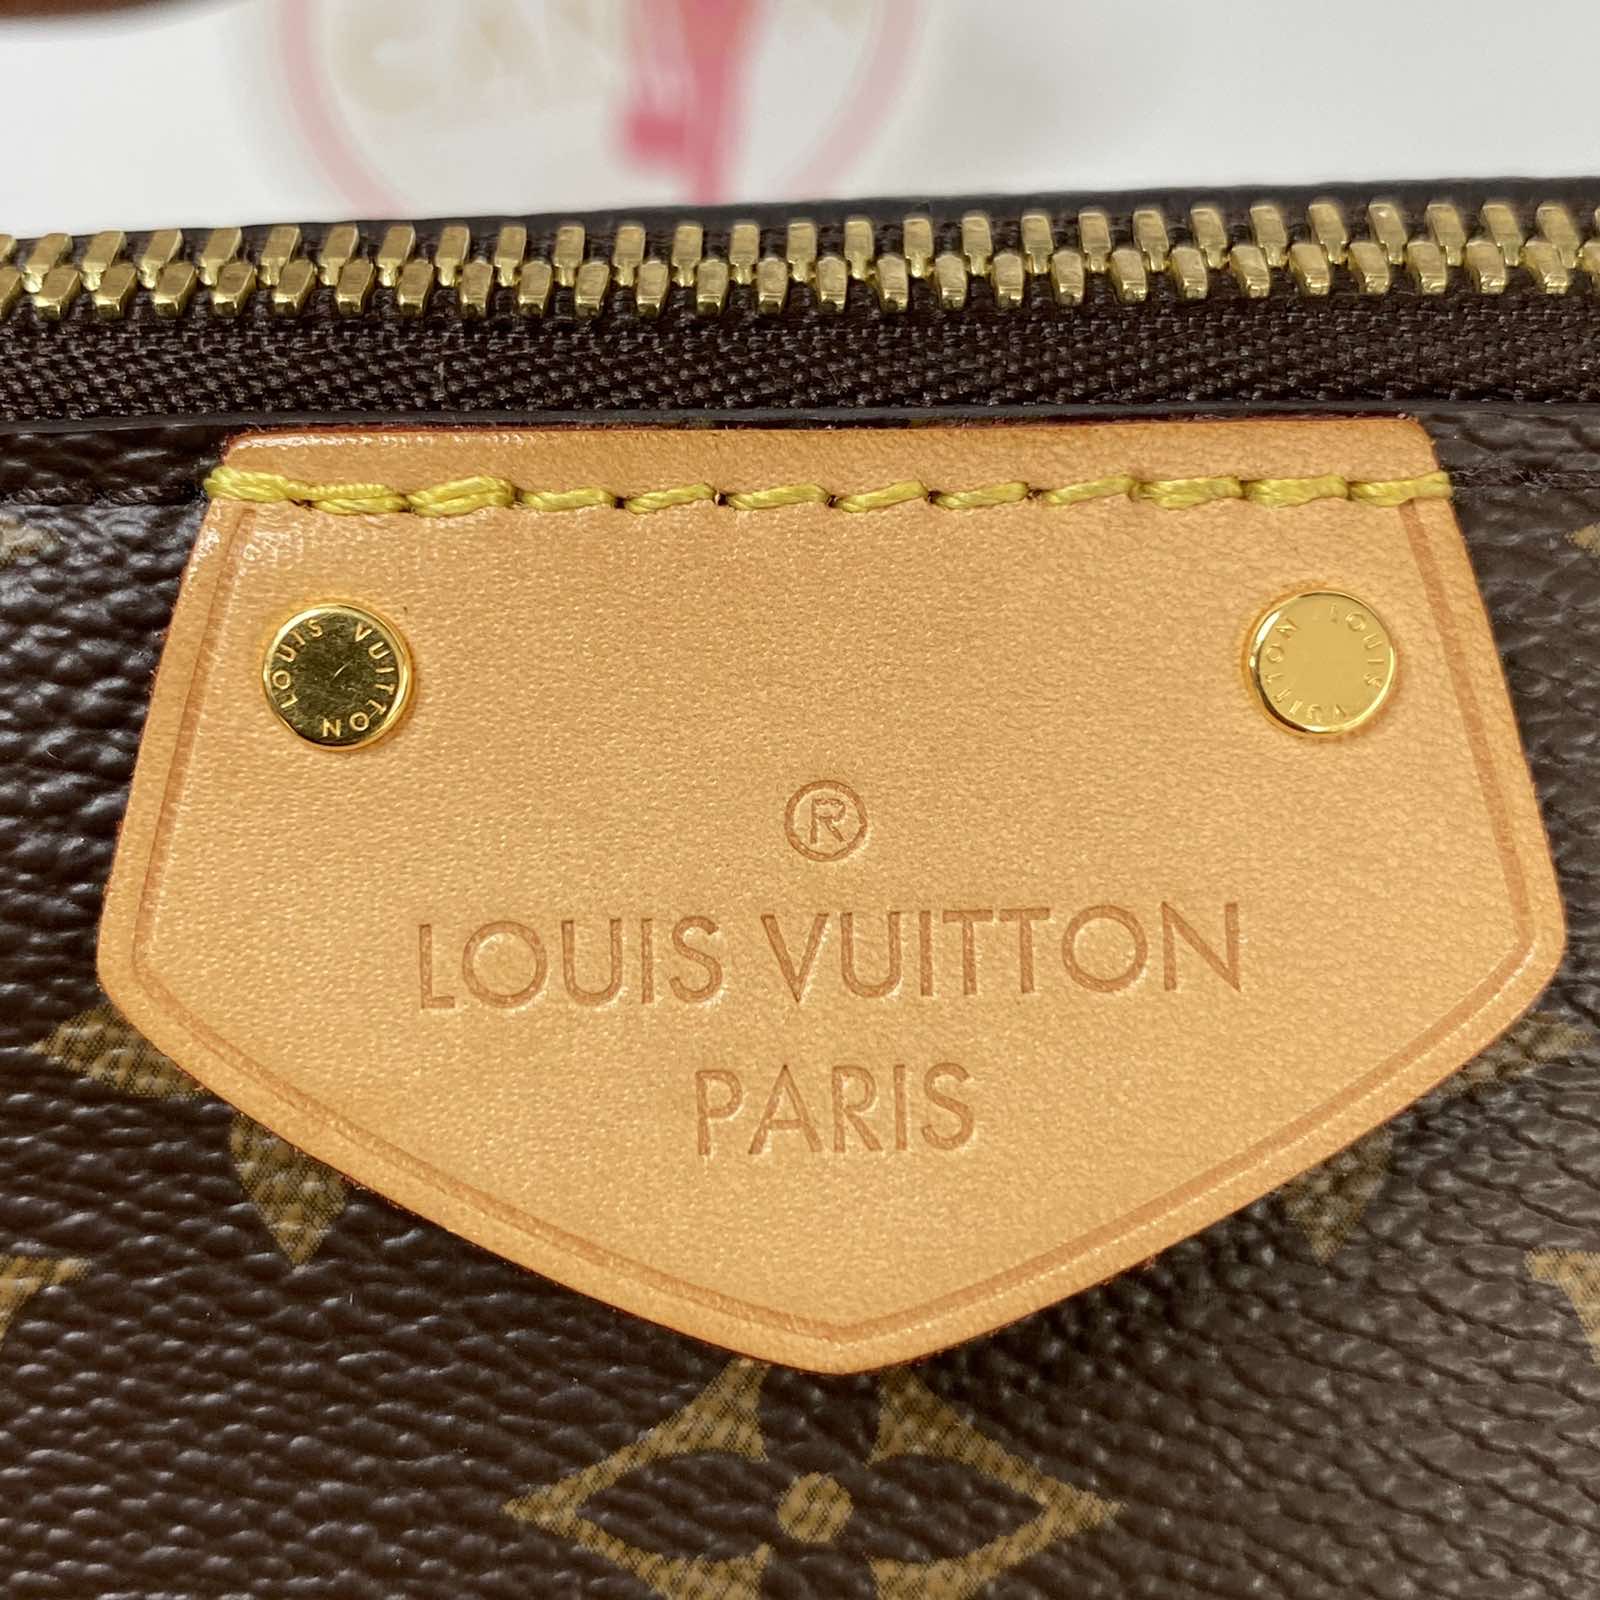 SOLD/LAYAWAY💕Louis Vuitton Monogram Turenne MM. Made in France. Date code:  MB1118. - Canon E-Bags Prime